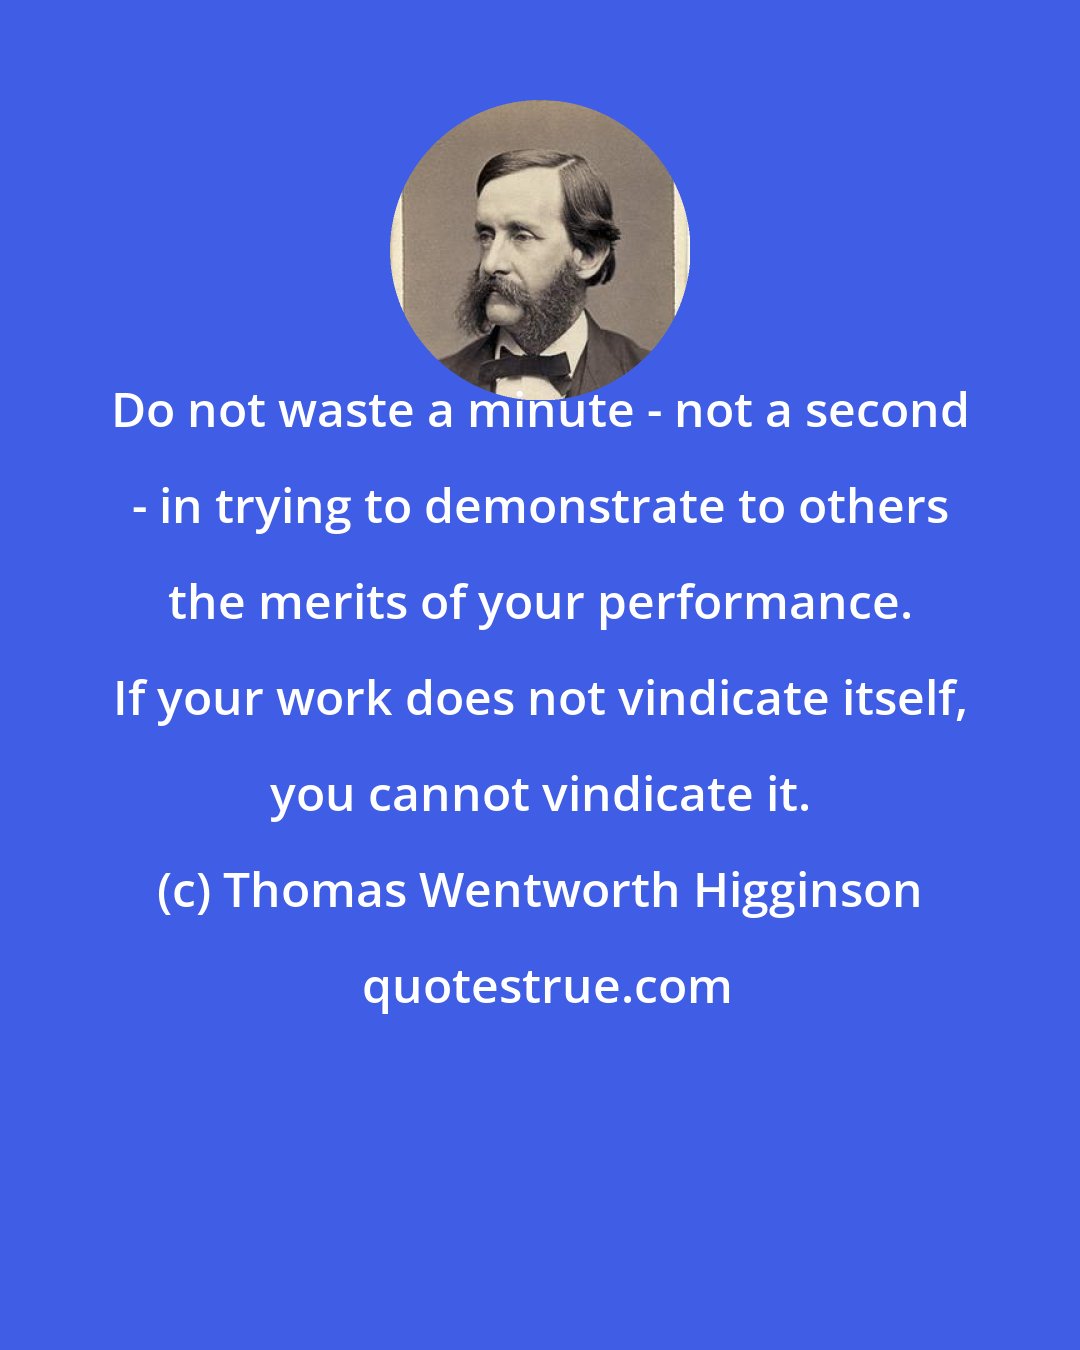 Thomas Wentworth Higginson: Do not waste a minute - not a second - in trying to demonstrate to others the merits of your performance. If your work does not vindicate itself, you cannot vindicate it.